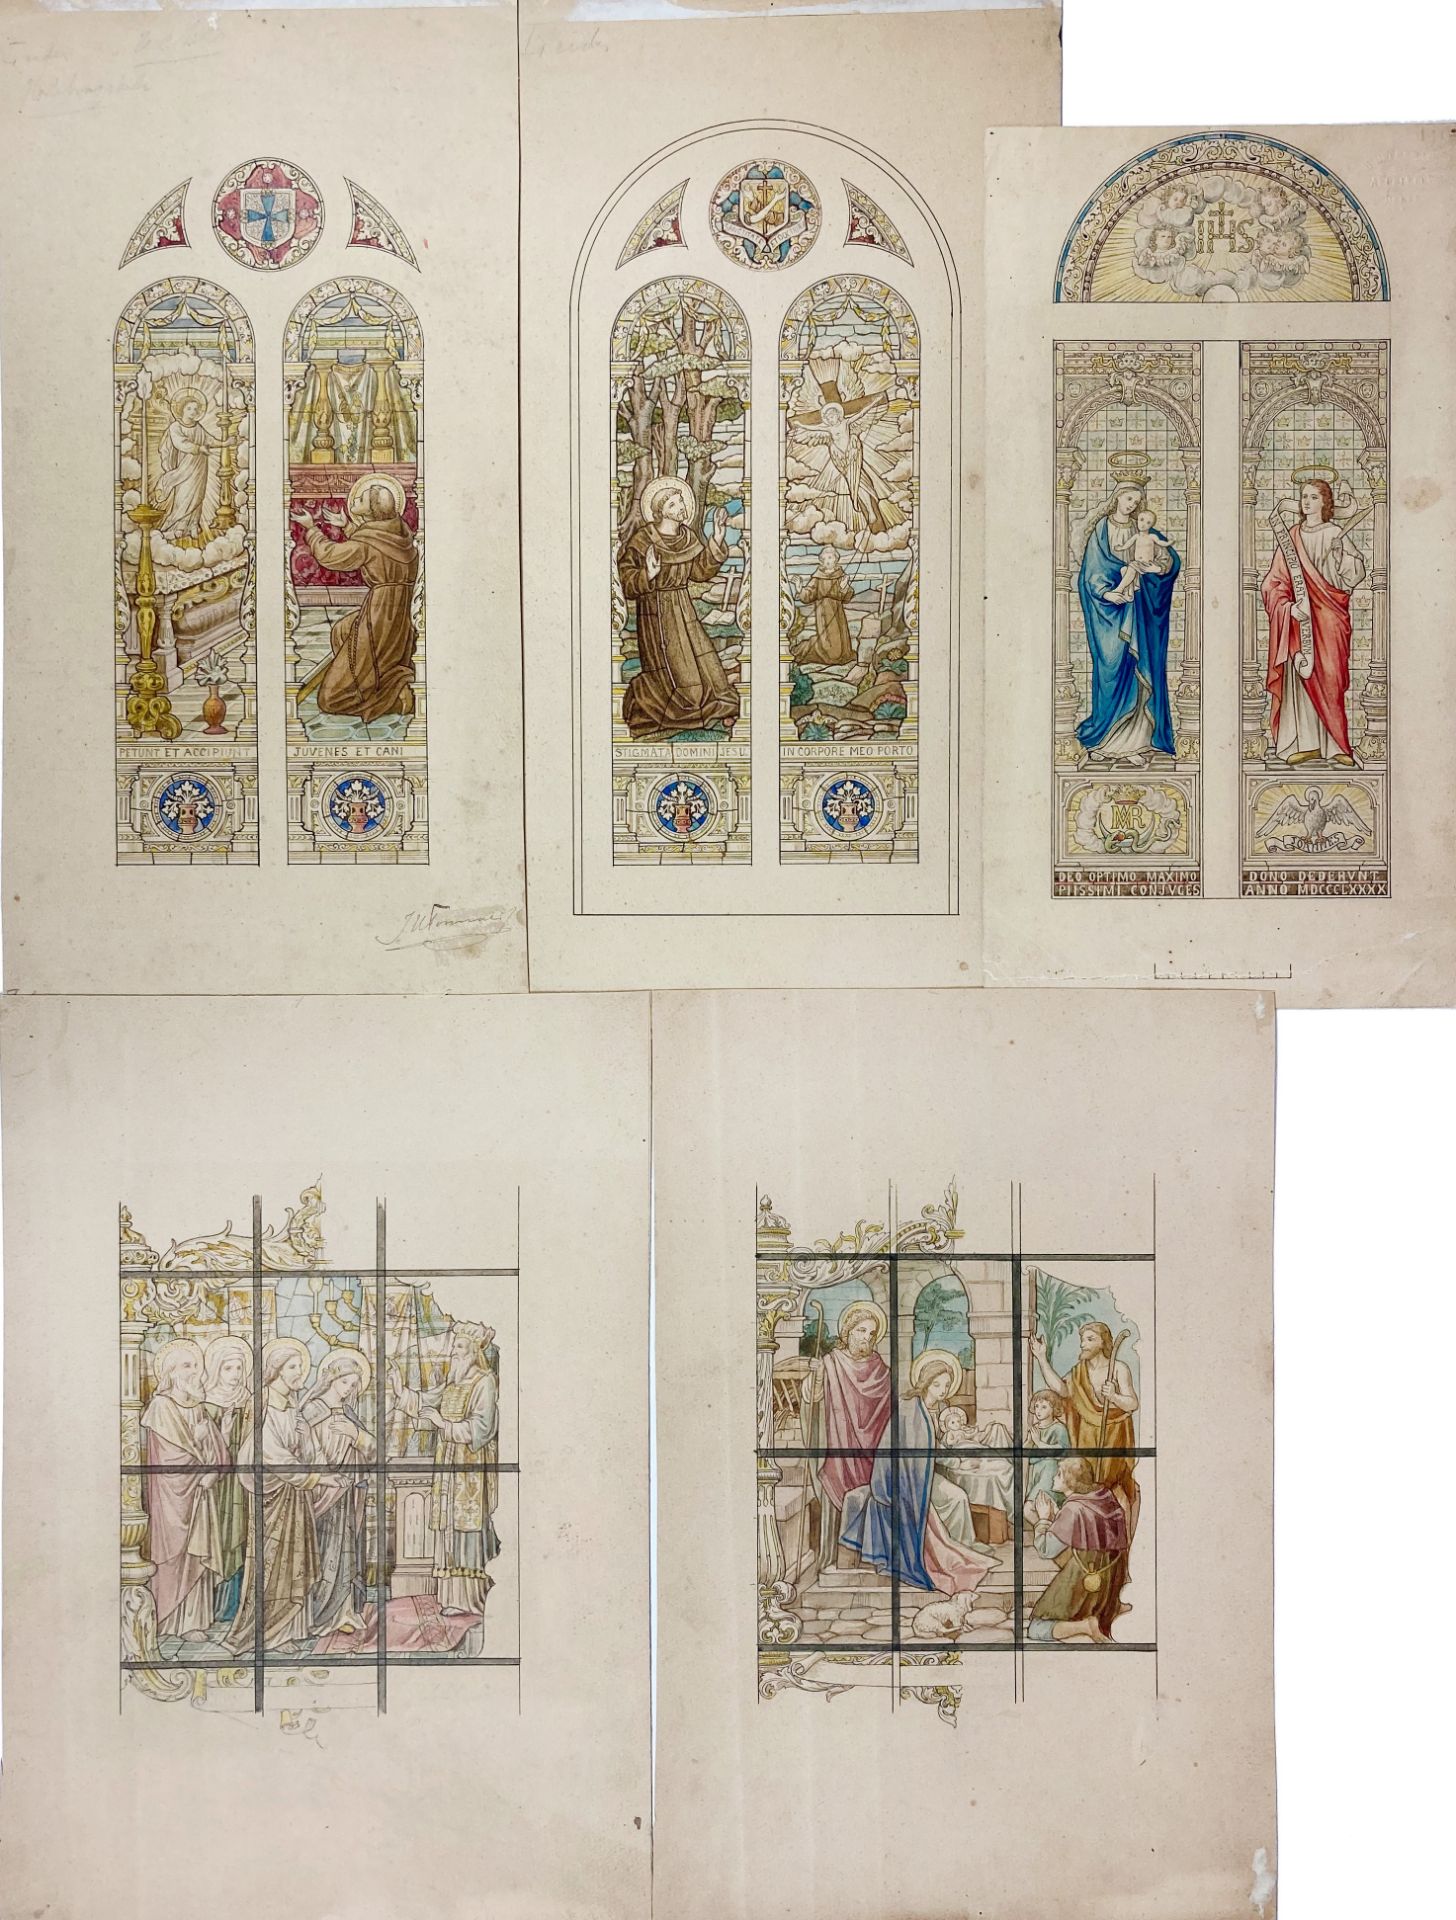 STAINED GLASS WINDOWS DESIGNS -- TONNAER, Josephus Hubertus ('Jozef') (1852-1929). Collection of 7